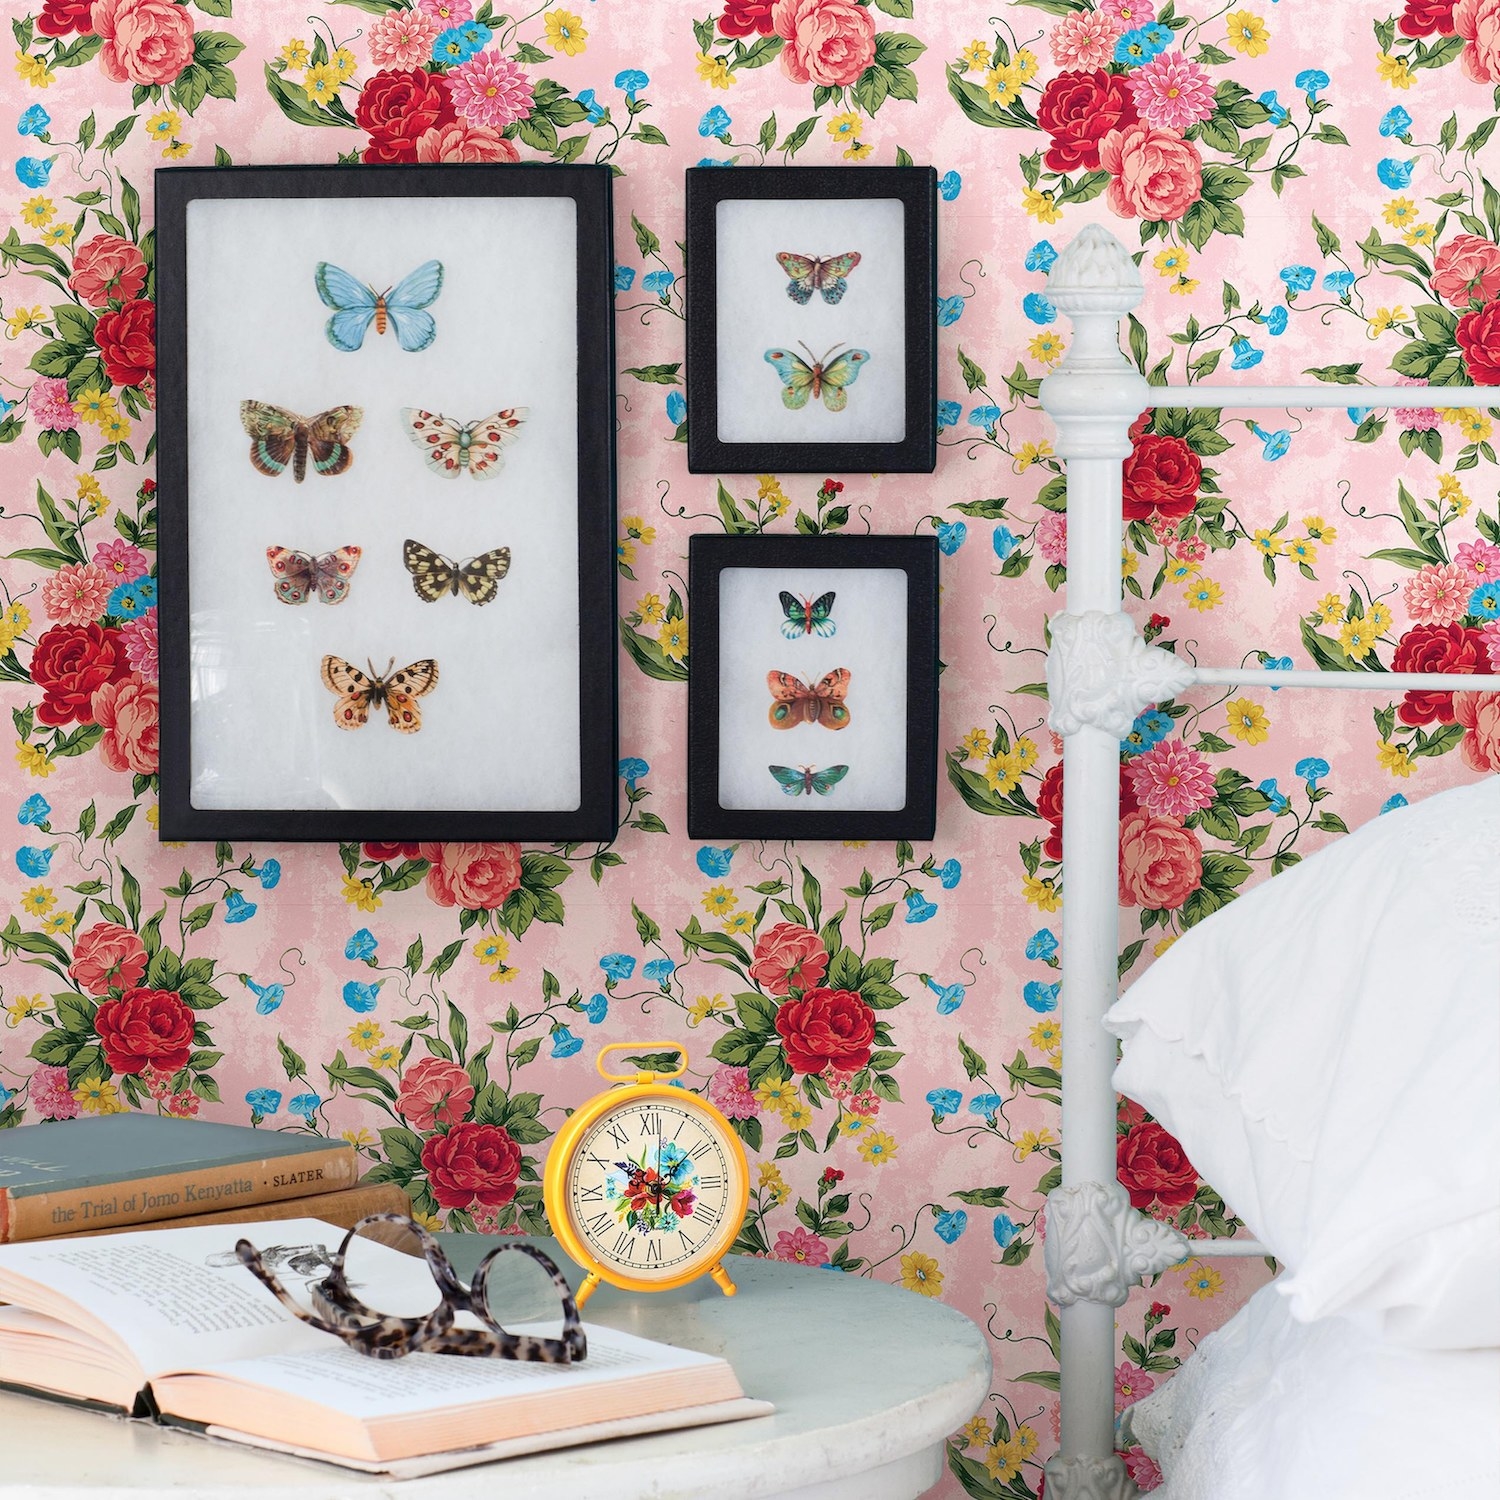 The pink, red, yellow, and blue floral wallpaper in a bedroom